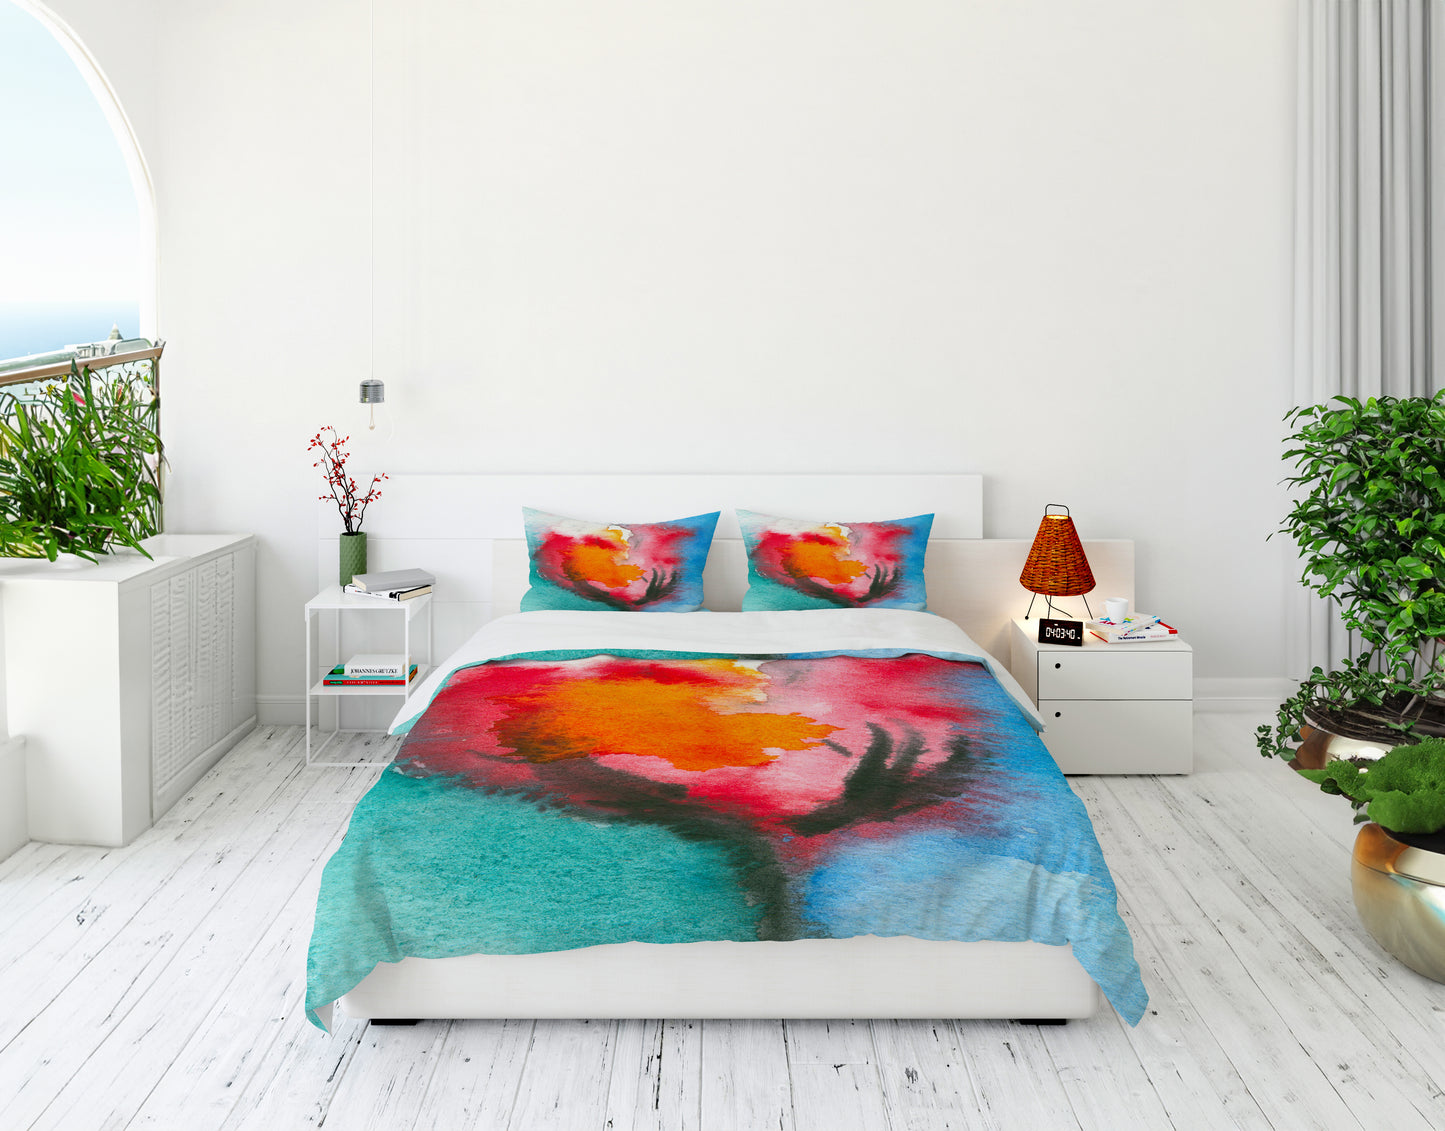 Abstract Tulip Duvet Cover or Comforter